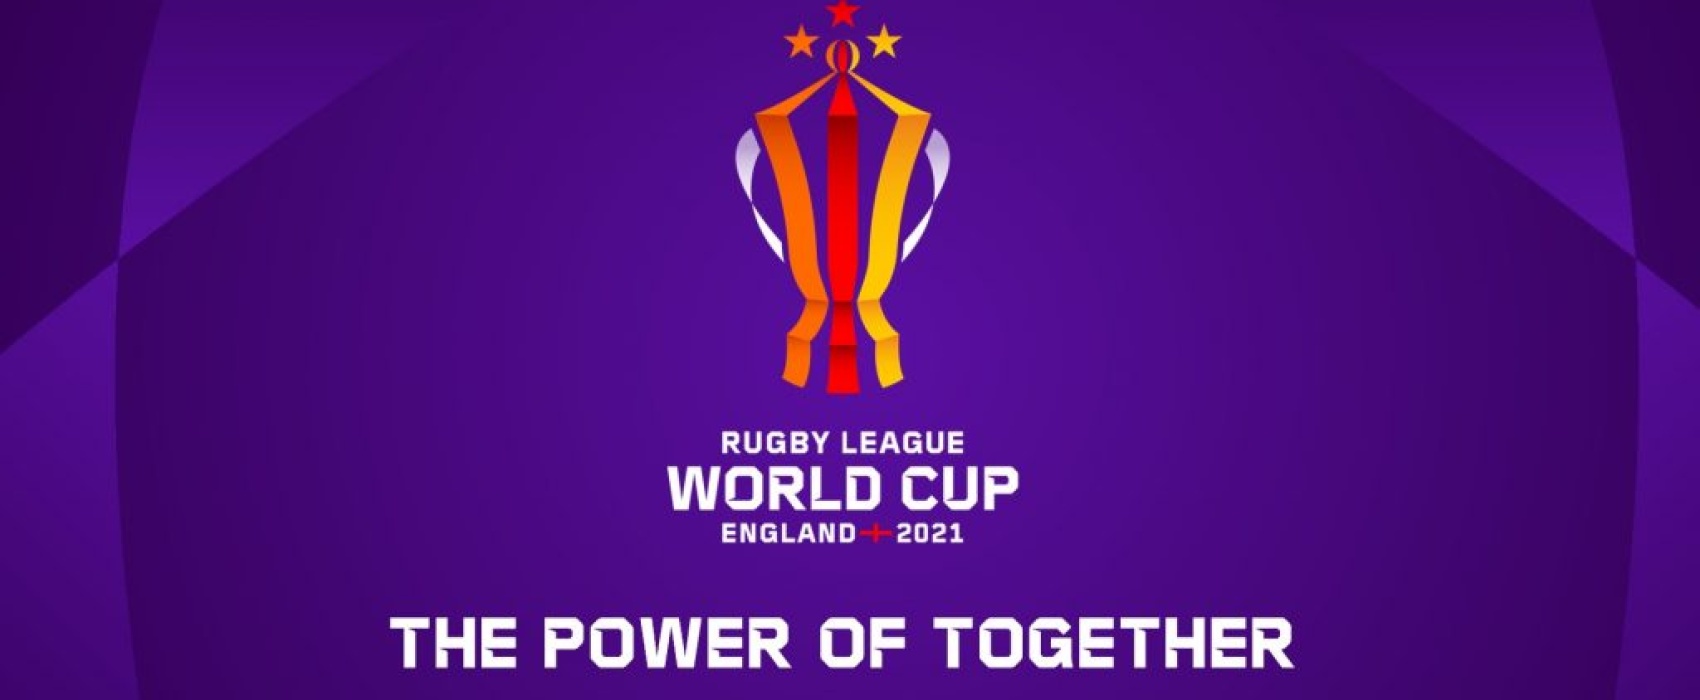 RLWC 2021 partner with Movember and RL Cares